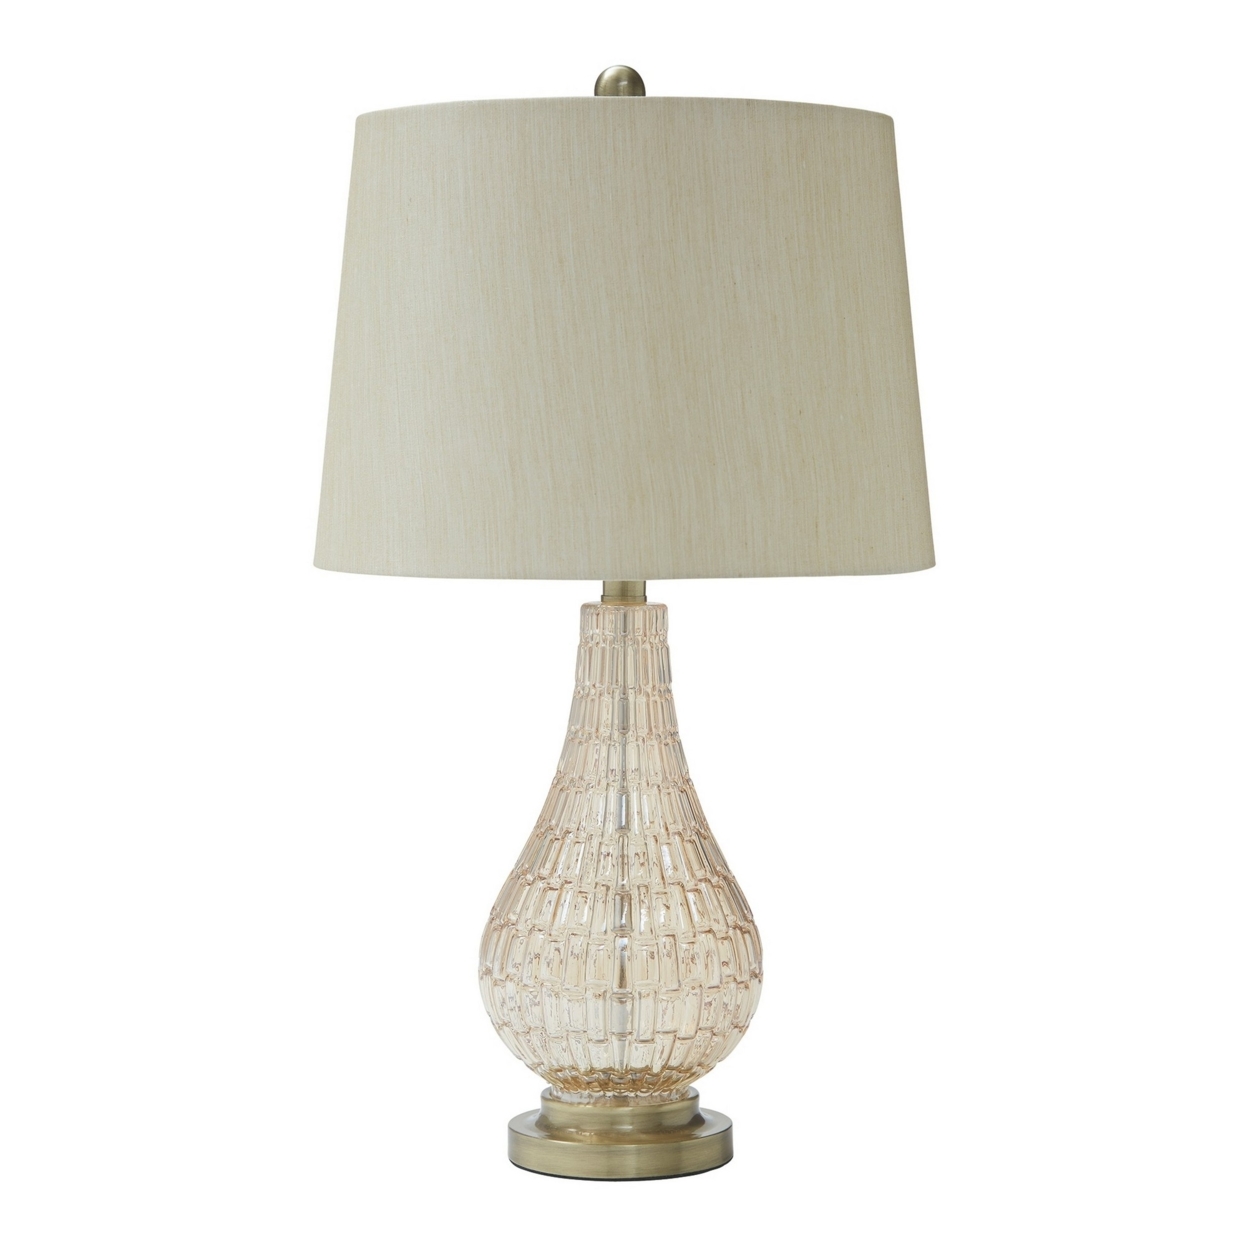 Bellied Glass Table Lamp with Fabric Drum Shade, Beige and Clear- Saltoro Sherpi